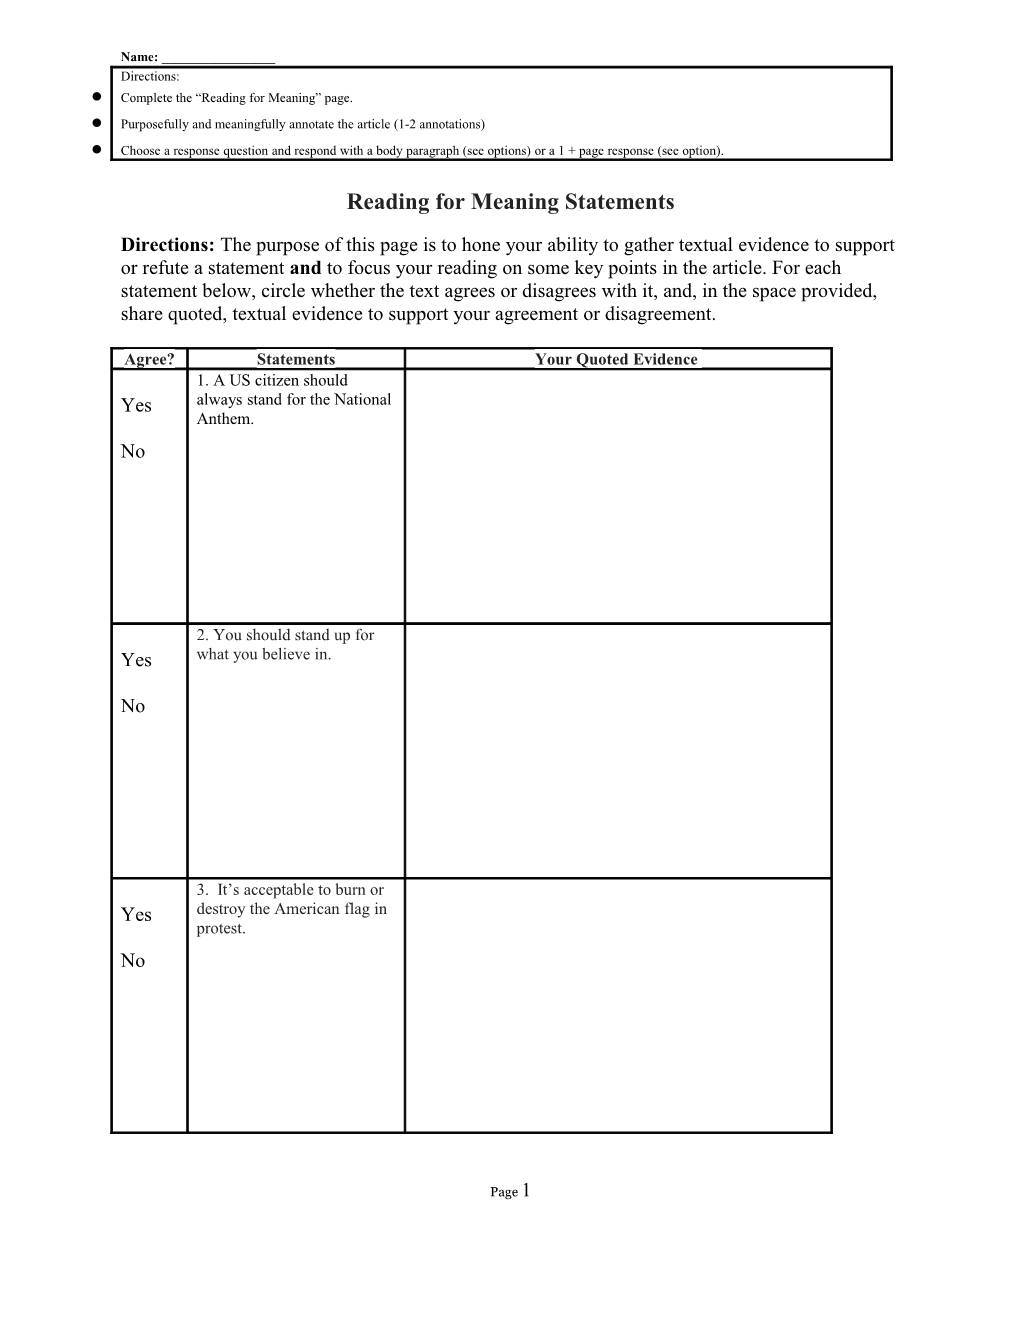 Reading for Meaning Statements